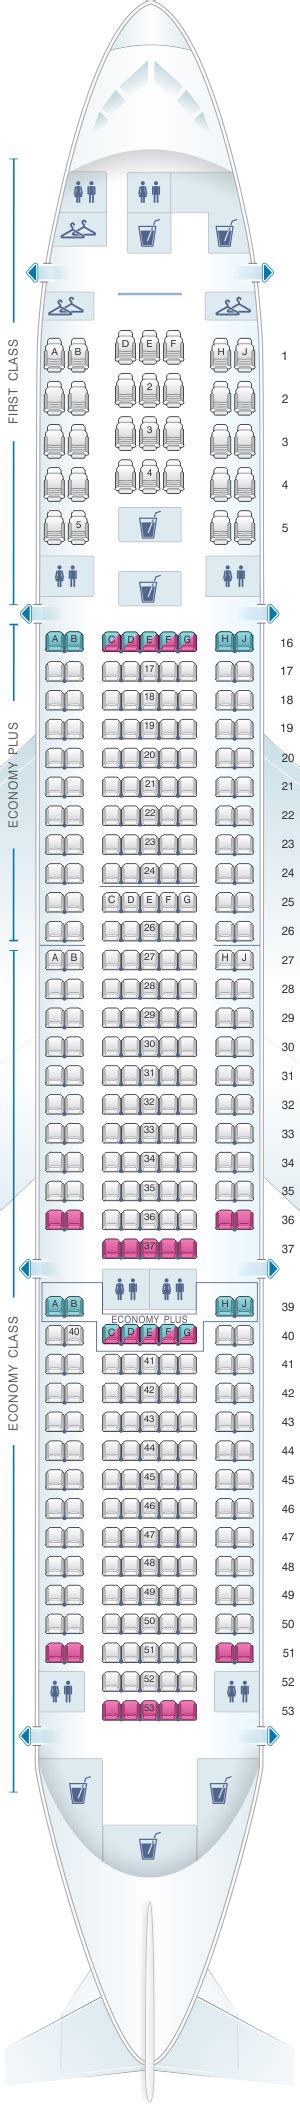 Seat map 777-200 united. The seat map of this United Airlines 777-200 is configured with Polaris business, Economy Plus, and Economy seating. The aircraft is used on long-haul intercontinental routes. Polaris class on this aircraft features a standard Business Class seat which transforms into a fully flat bed. Polaris inflight service is offered. Featured user comments 